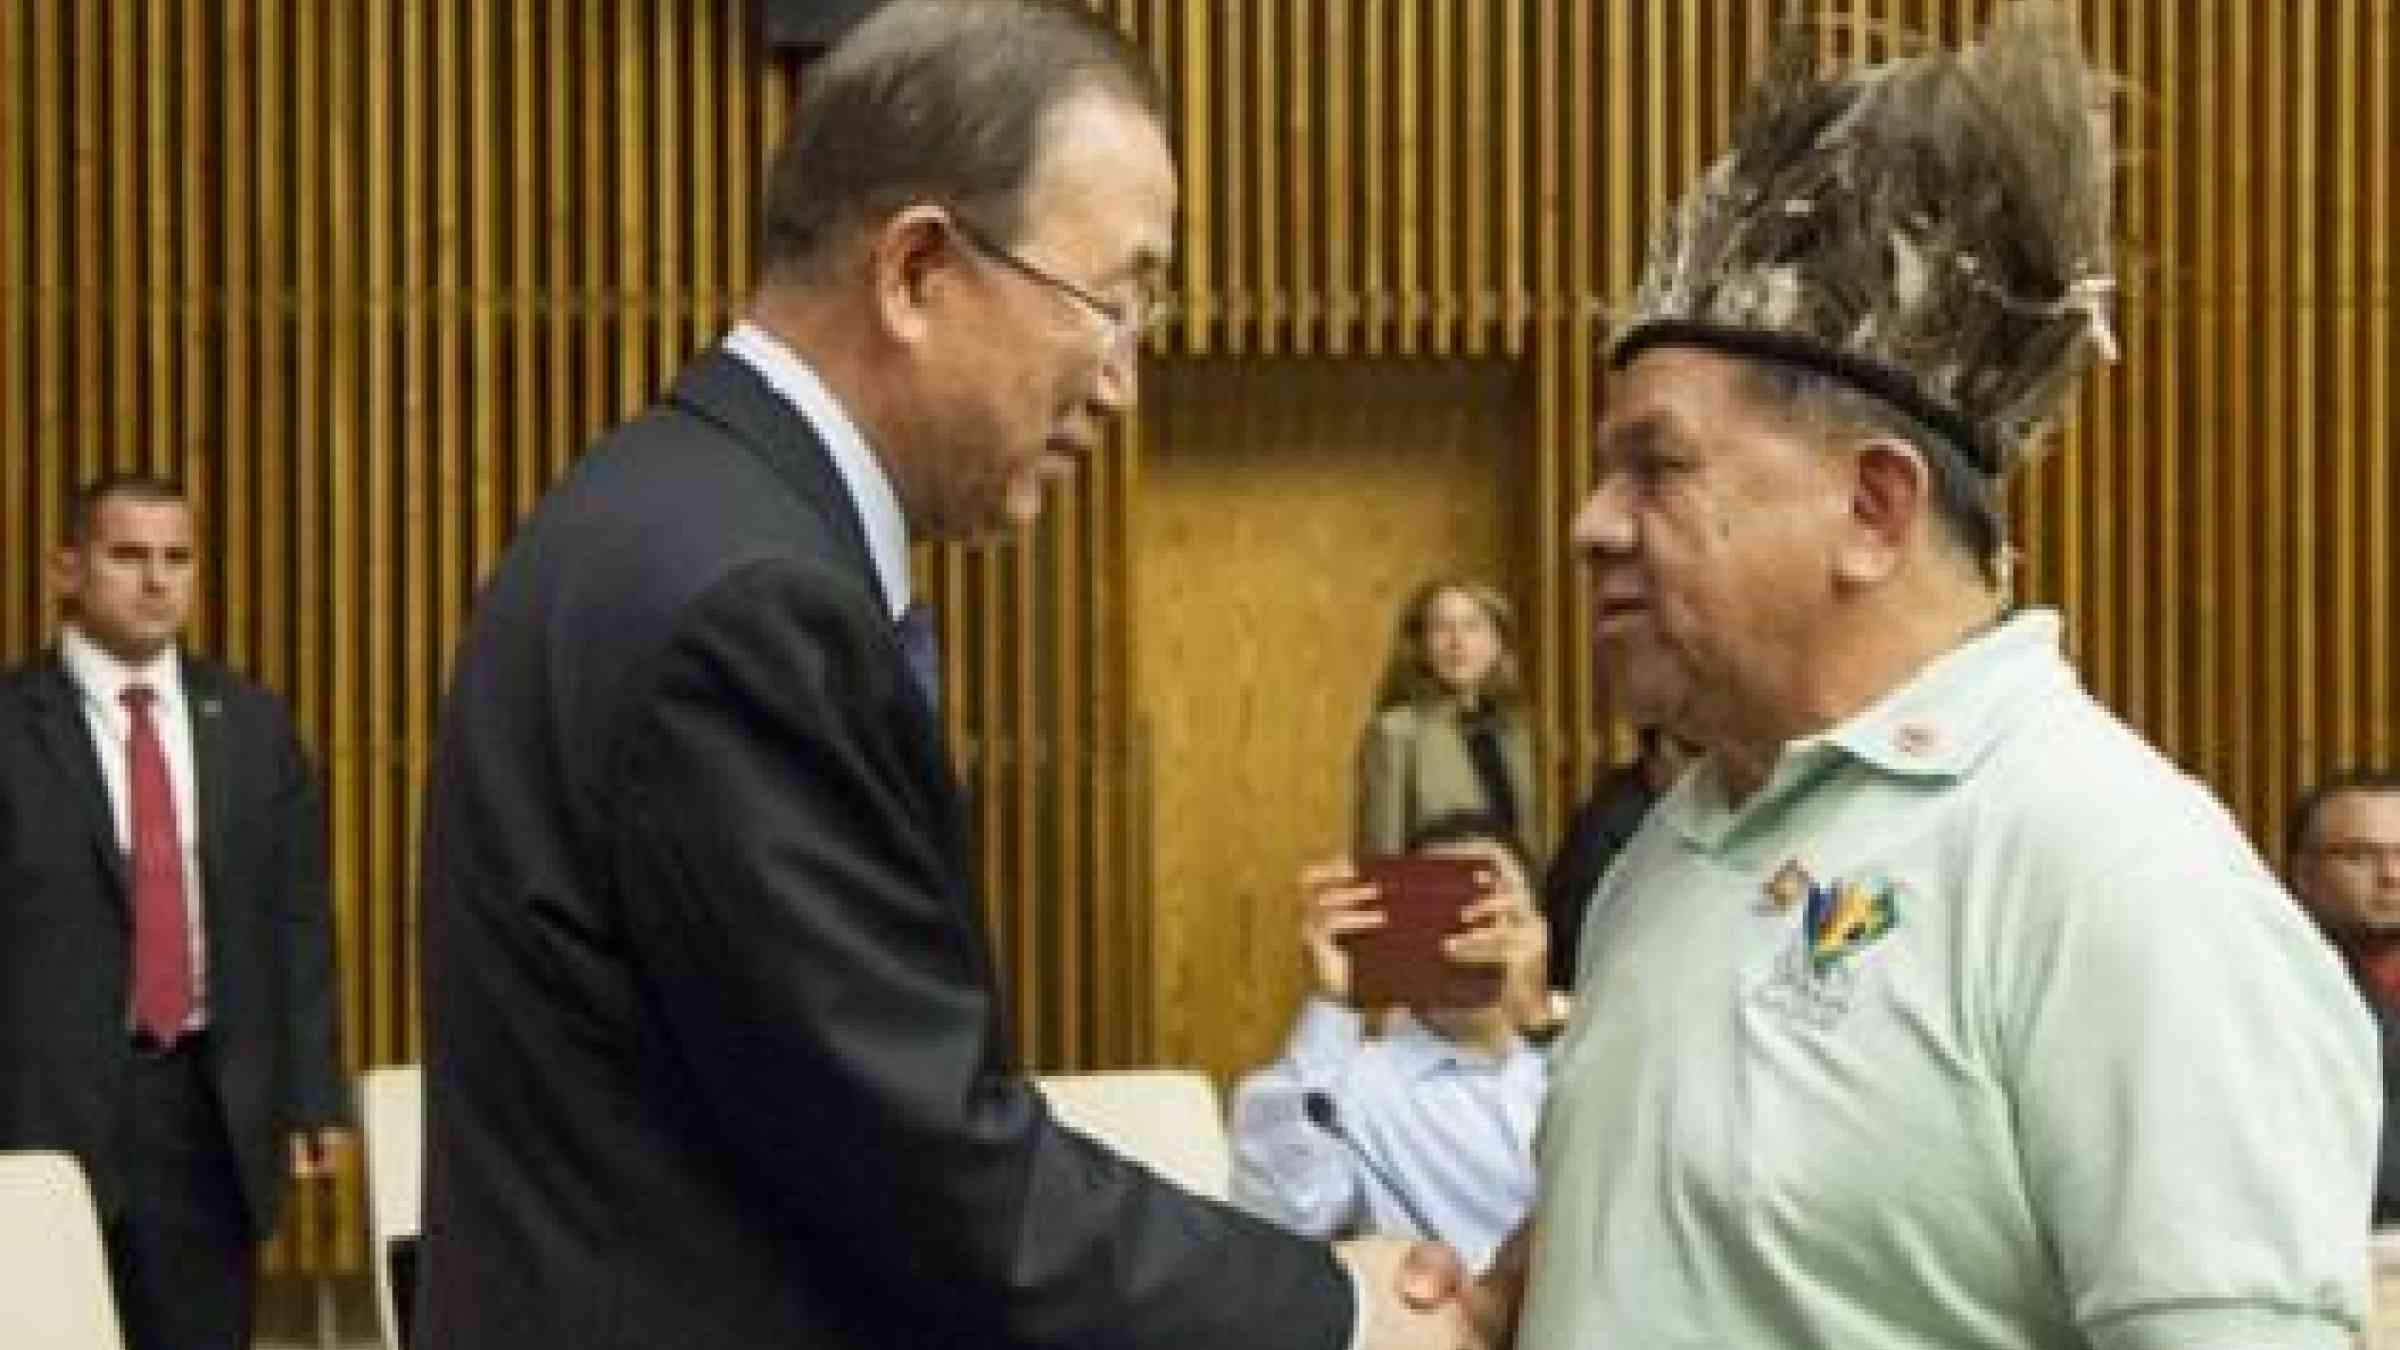 UN Secretary-General Ban Ki-moon (left) greets a participant at a special event in New York marking International Day of the World’s Indigenous Peoples (Photo: UN Photo/Rick Bajornas)